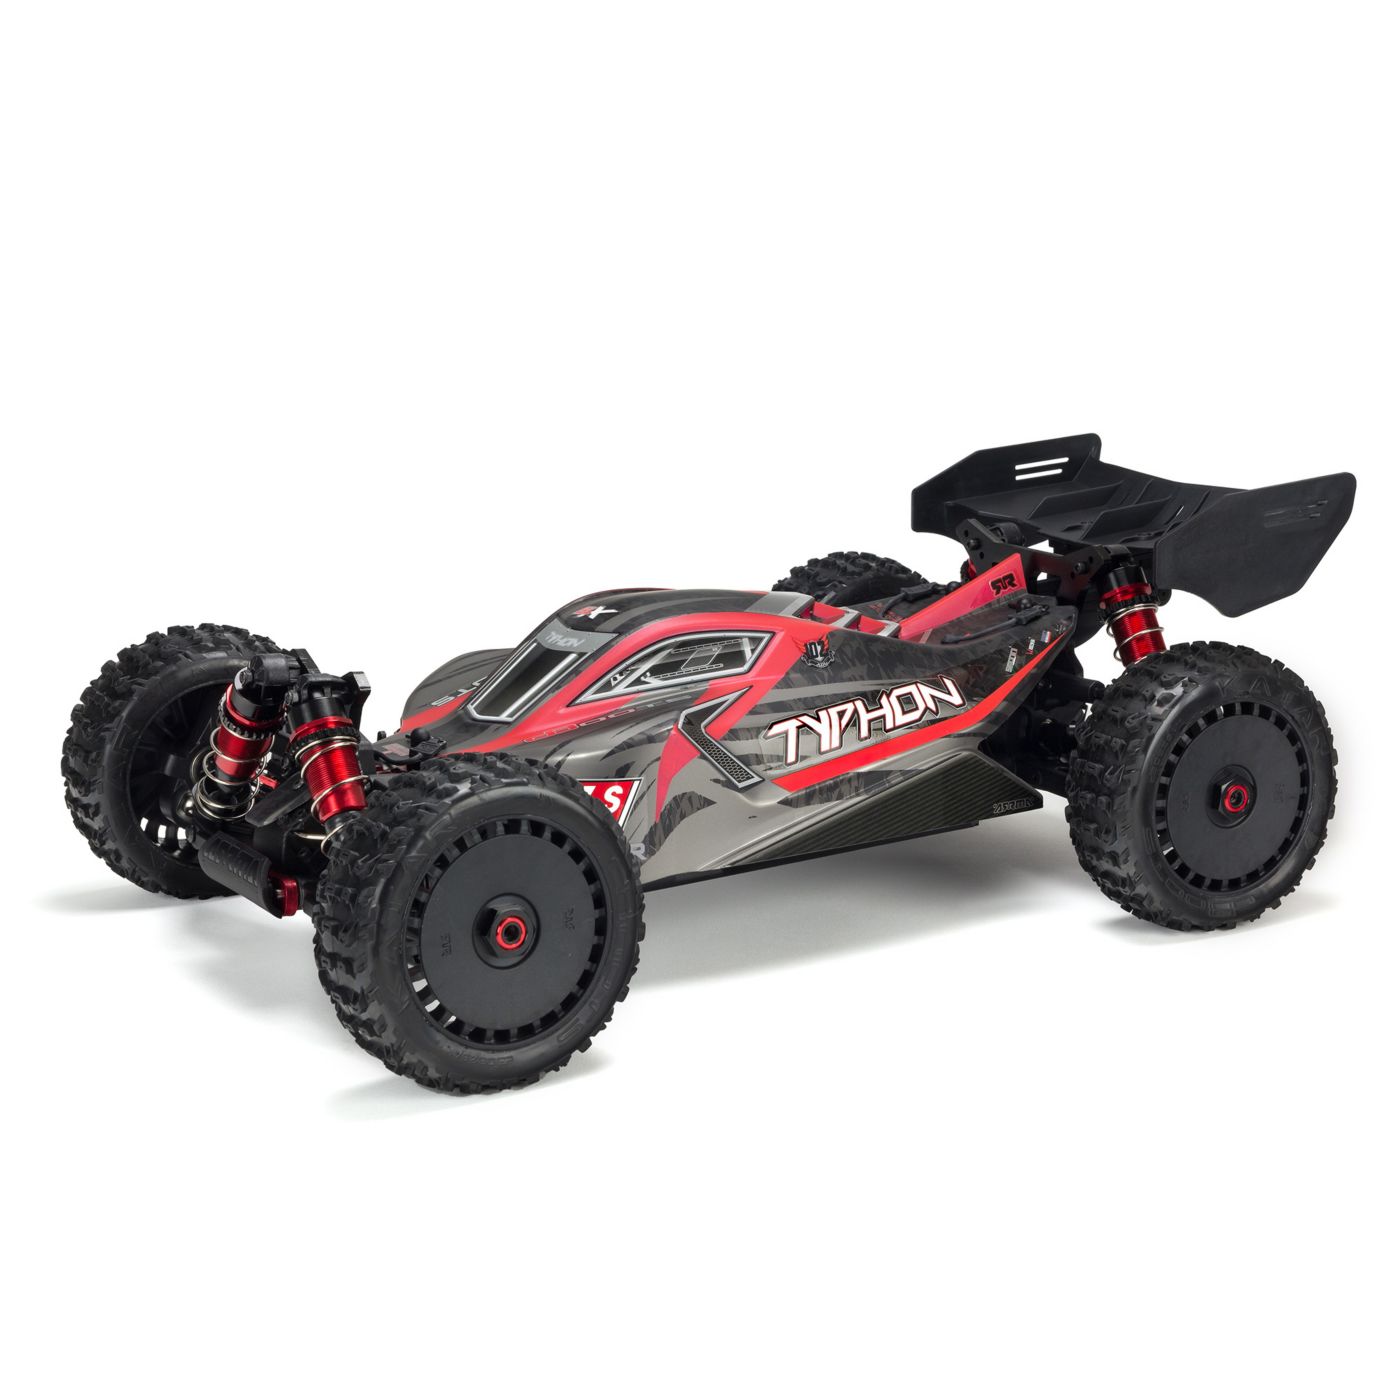 Arrma Typhon 6s BLX 4wd Buggy rtr 01